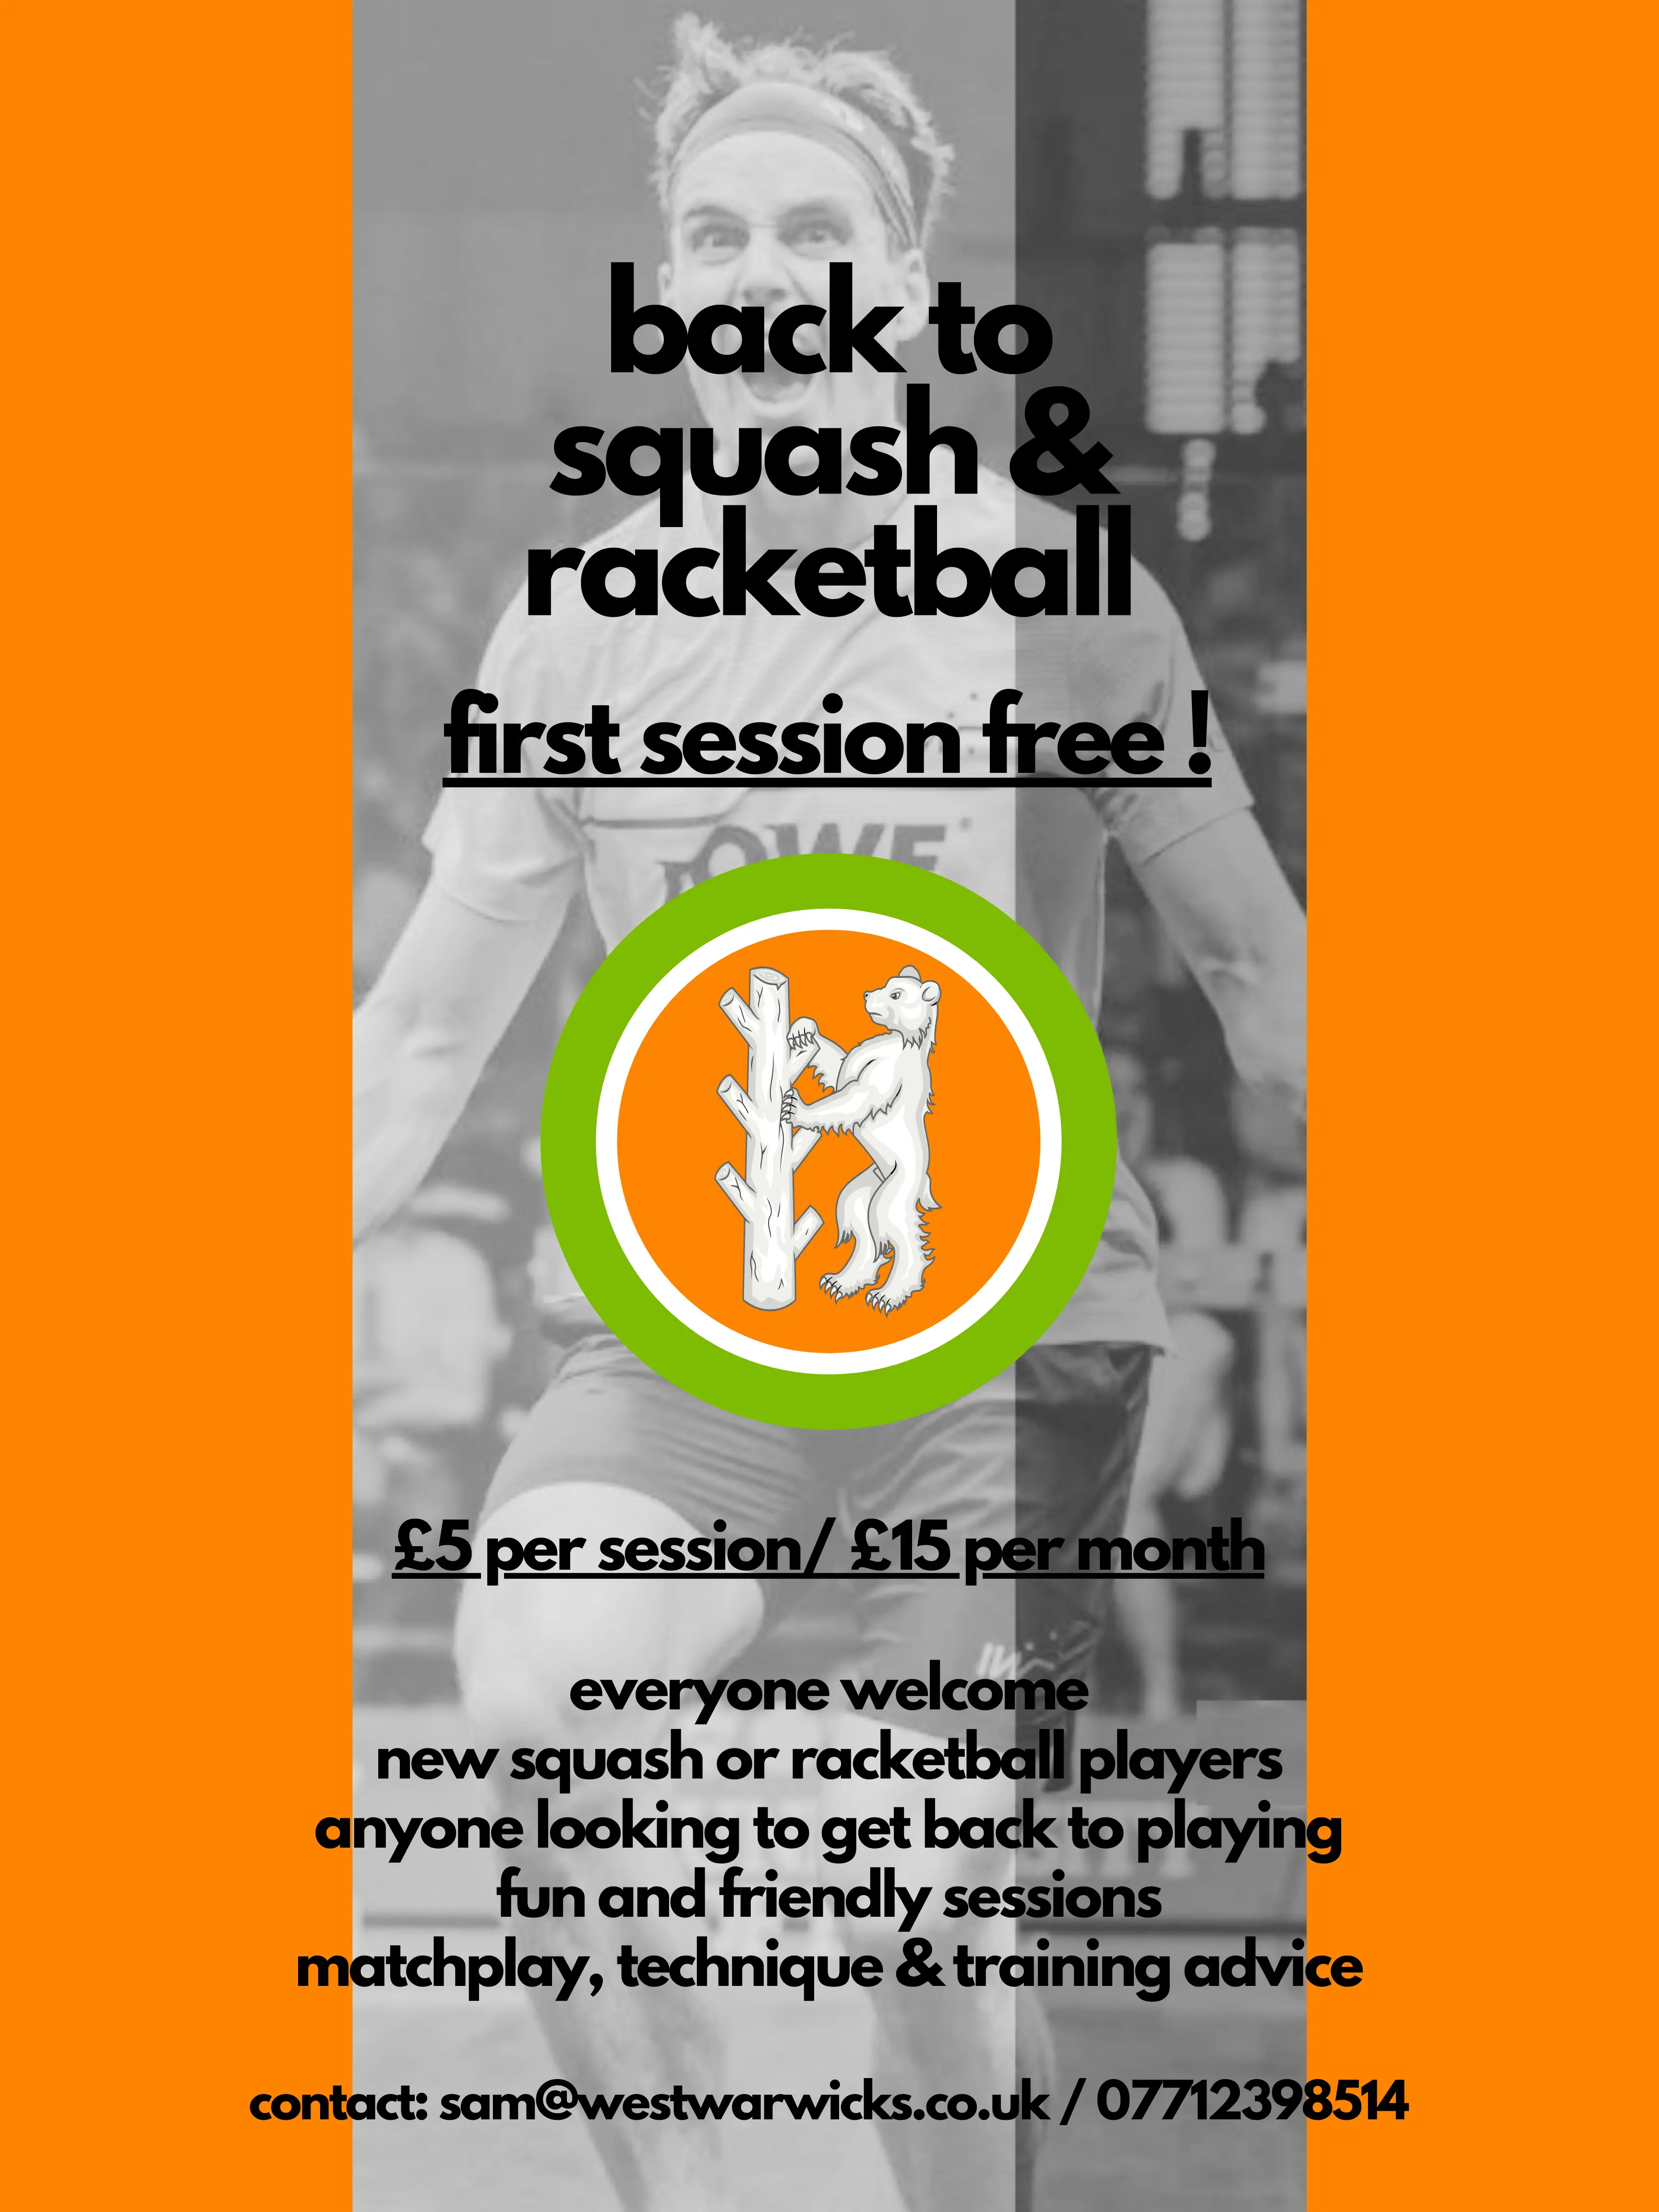 Get Back to Squash & Racketball - anyone looking to get back into playing